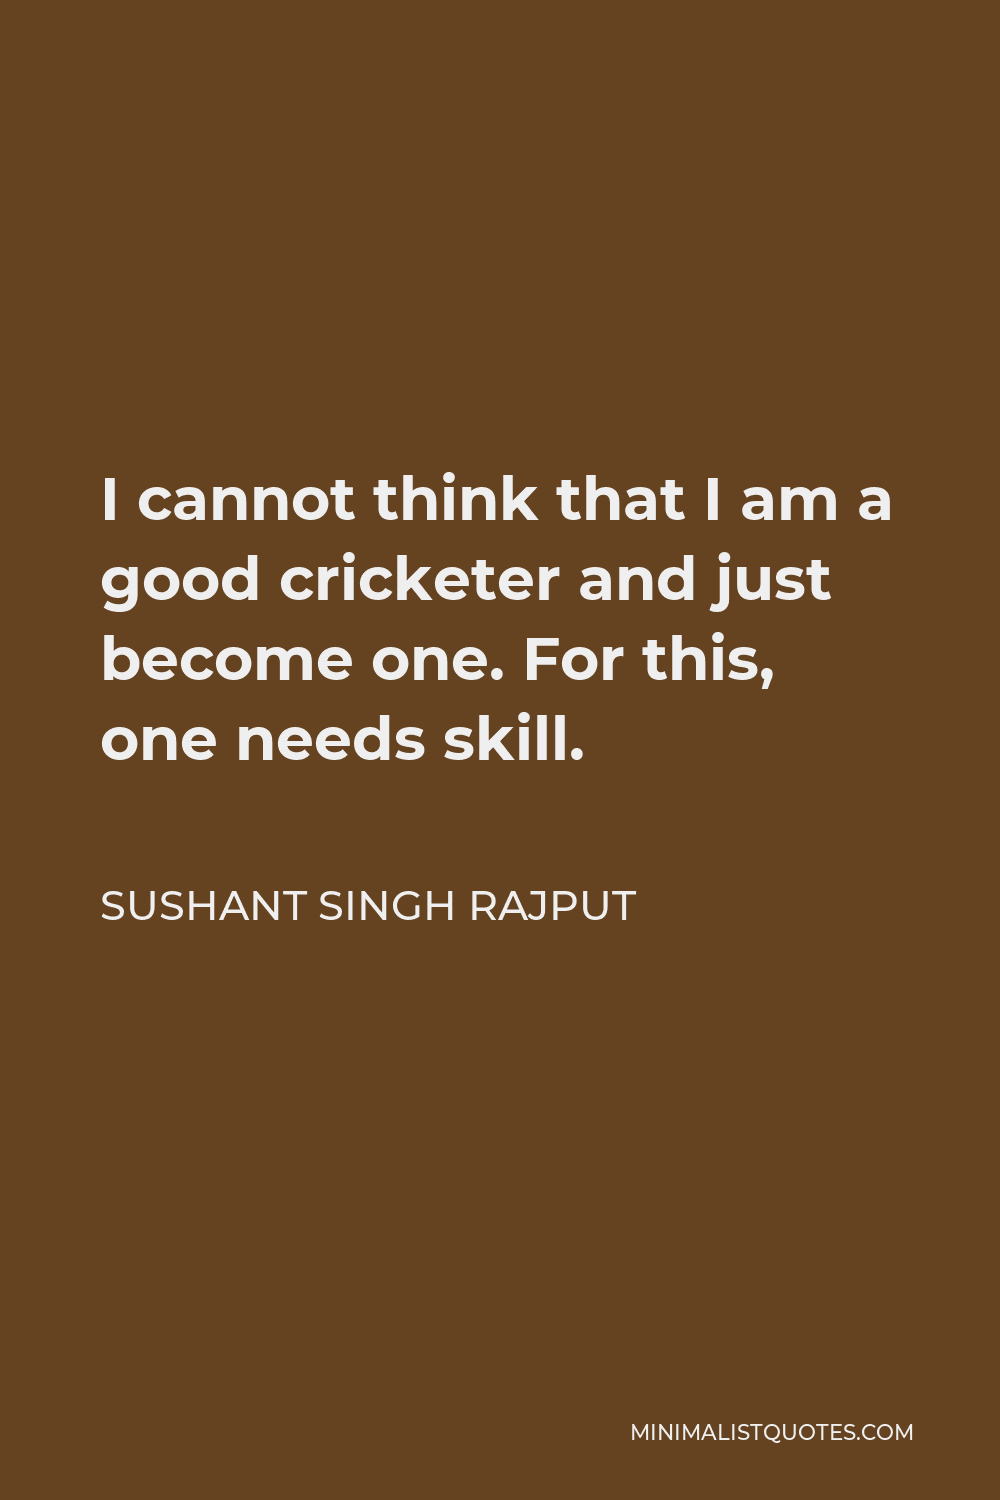 Sushant Singh Rajput Quote - I cannot think that I am a good cricketer and just become one. For this, one needs skill.